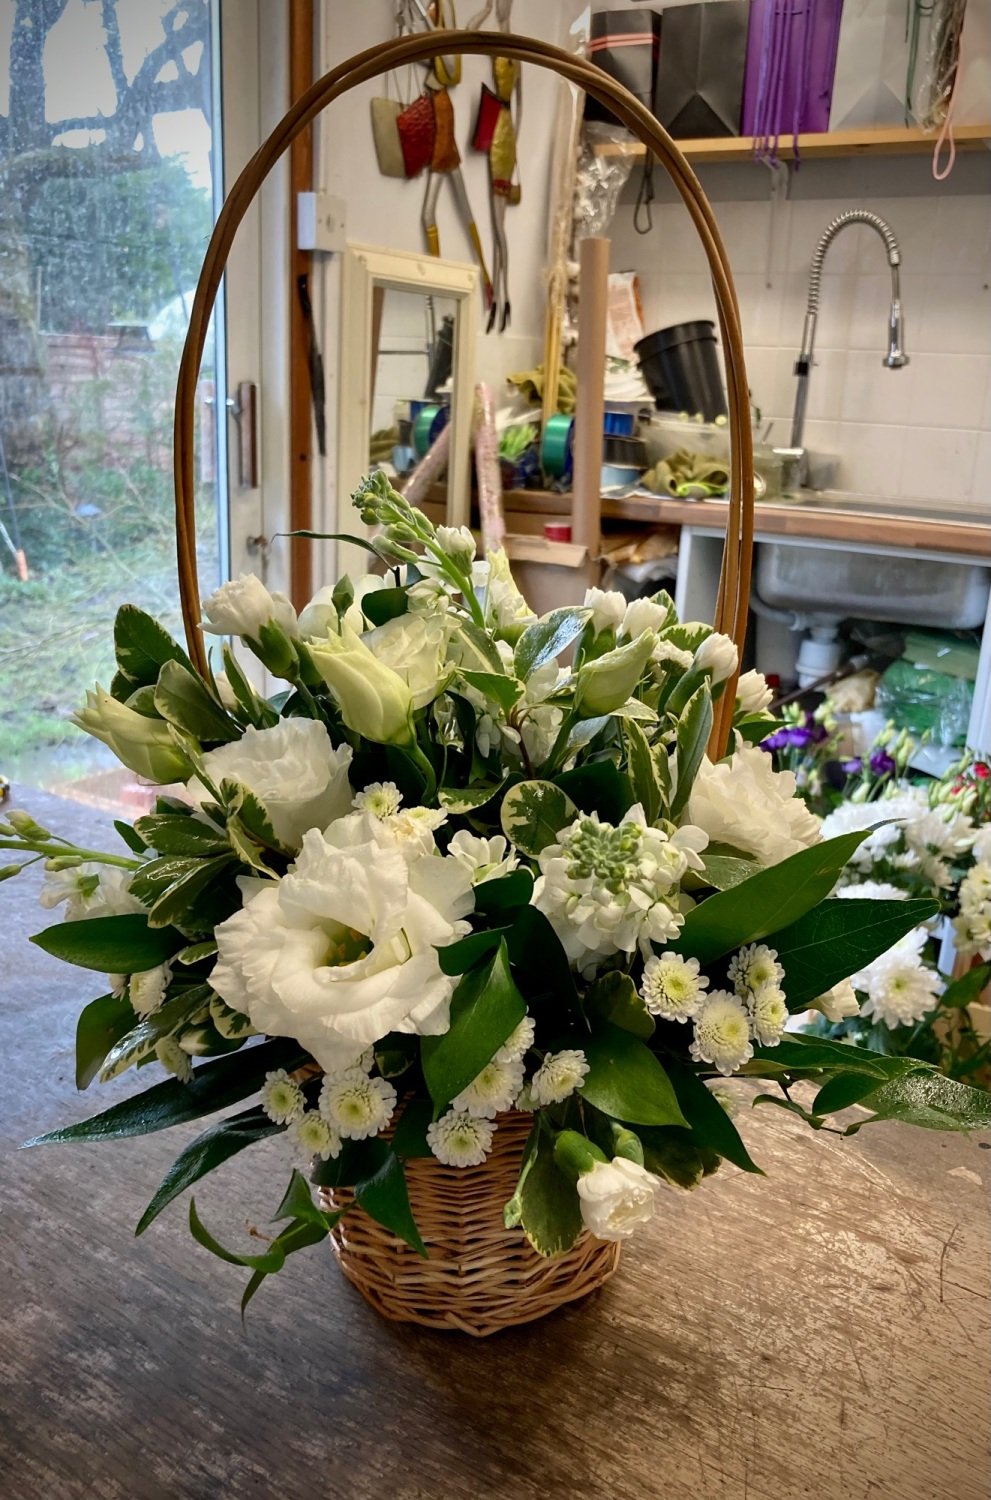 Round fresh flower basket floral arrangement for Easter, Mothers day,  birthday, wedding, funeral or cremation flowers from Aylesbury florist  Willow House Flowers